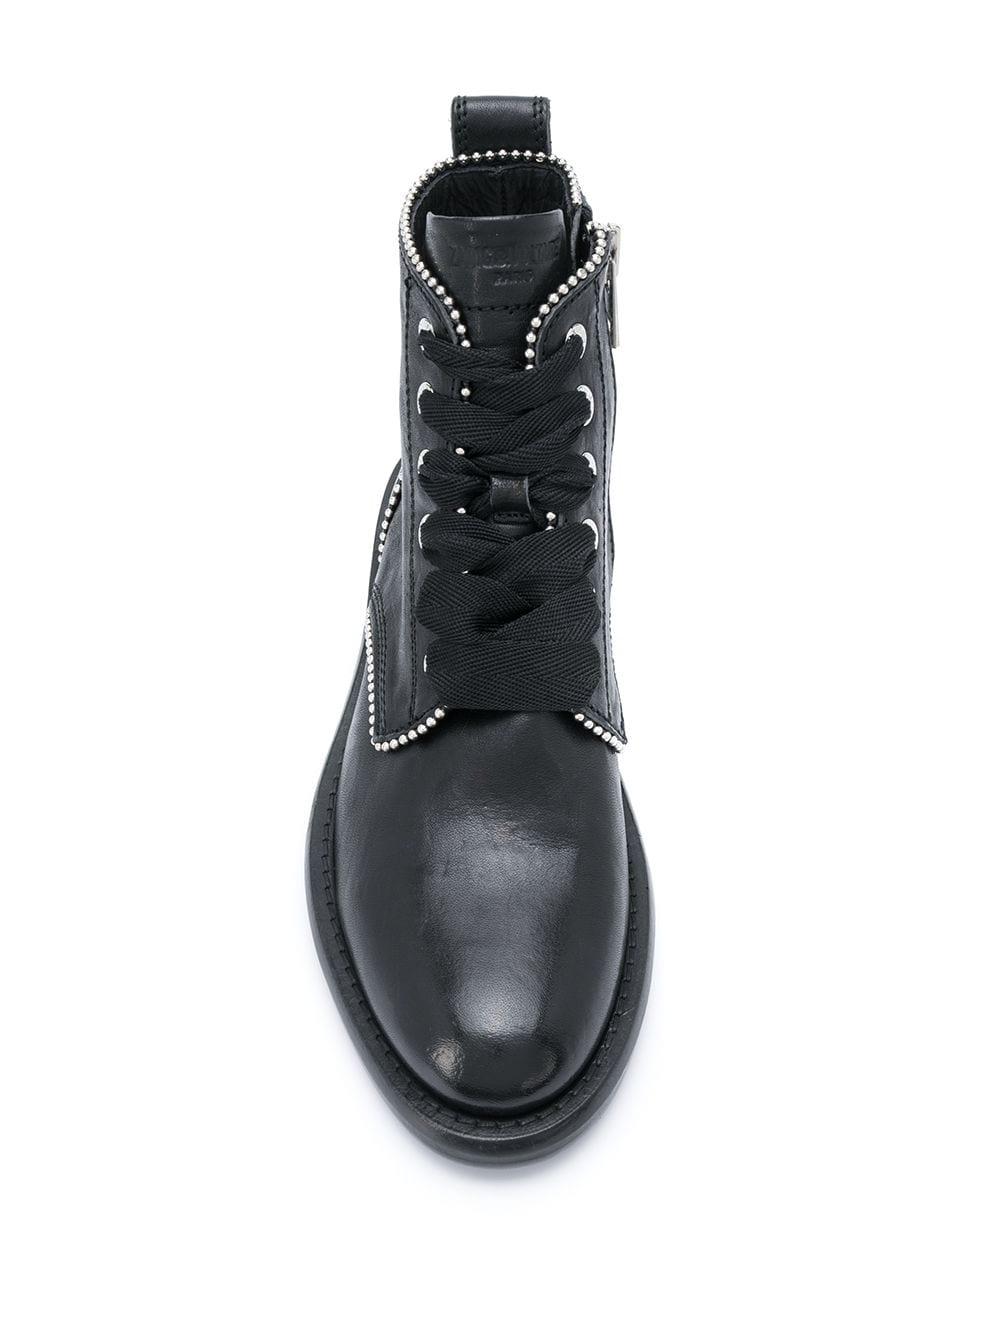 Zadig & Voltaire Studded Lace-up Leather Boots in Black - Lyst